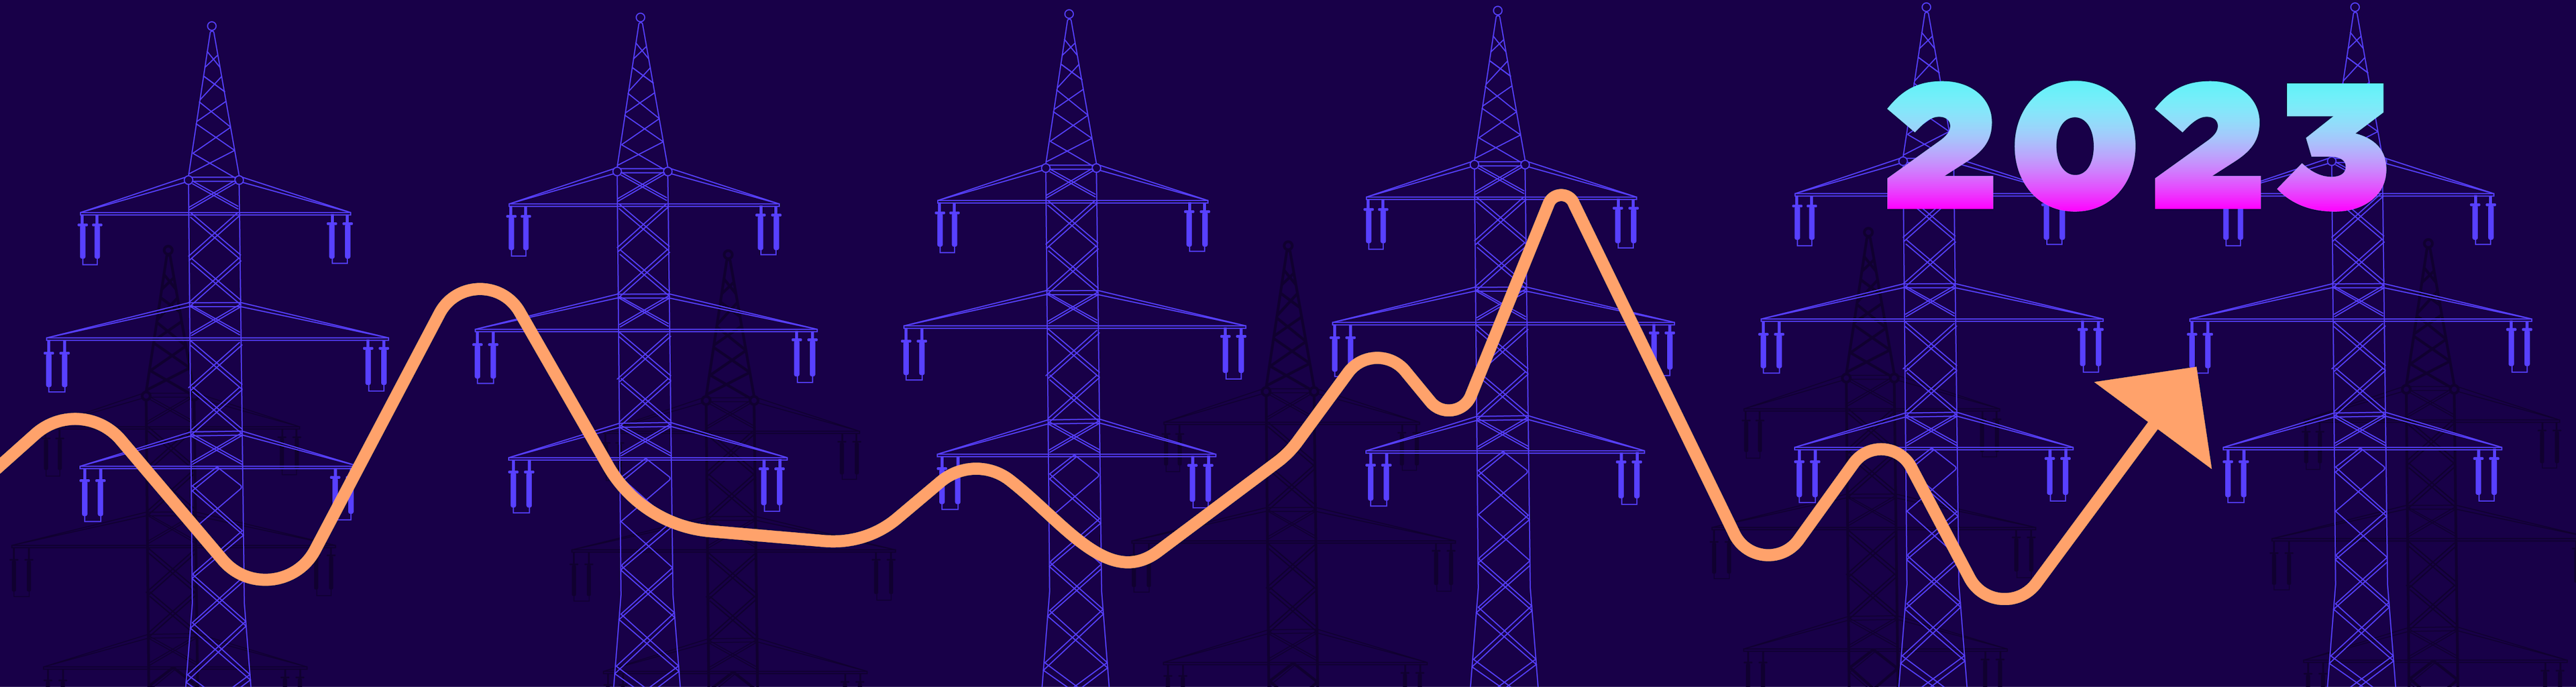 illustration with power transformers and line graph